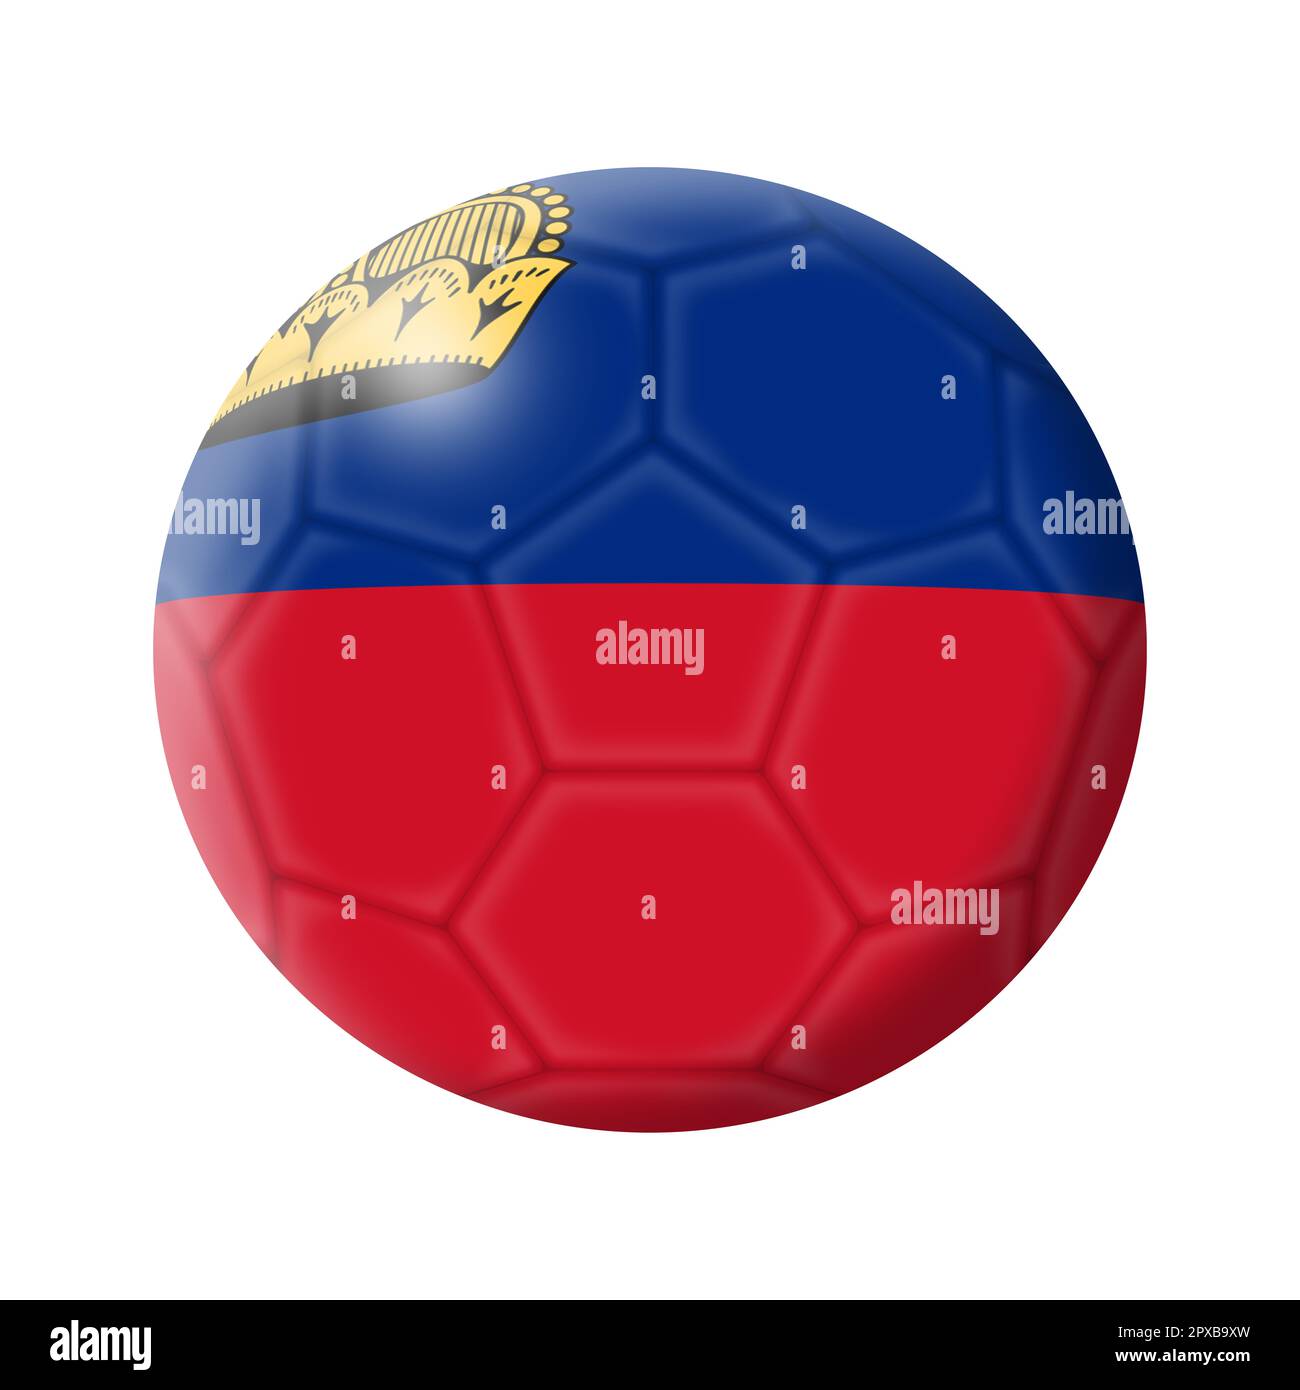 A Leichtenstein soccer ball football 3d illustration isolated on white with clipping path Stock Photo